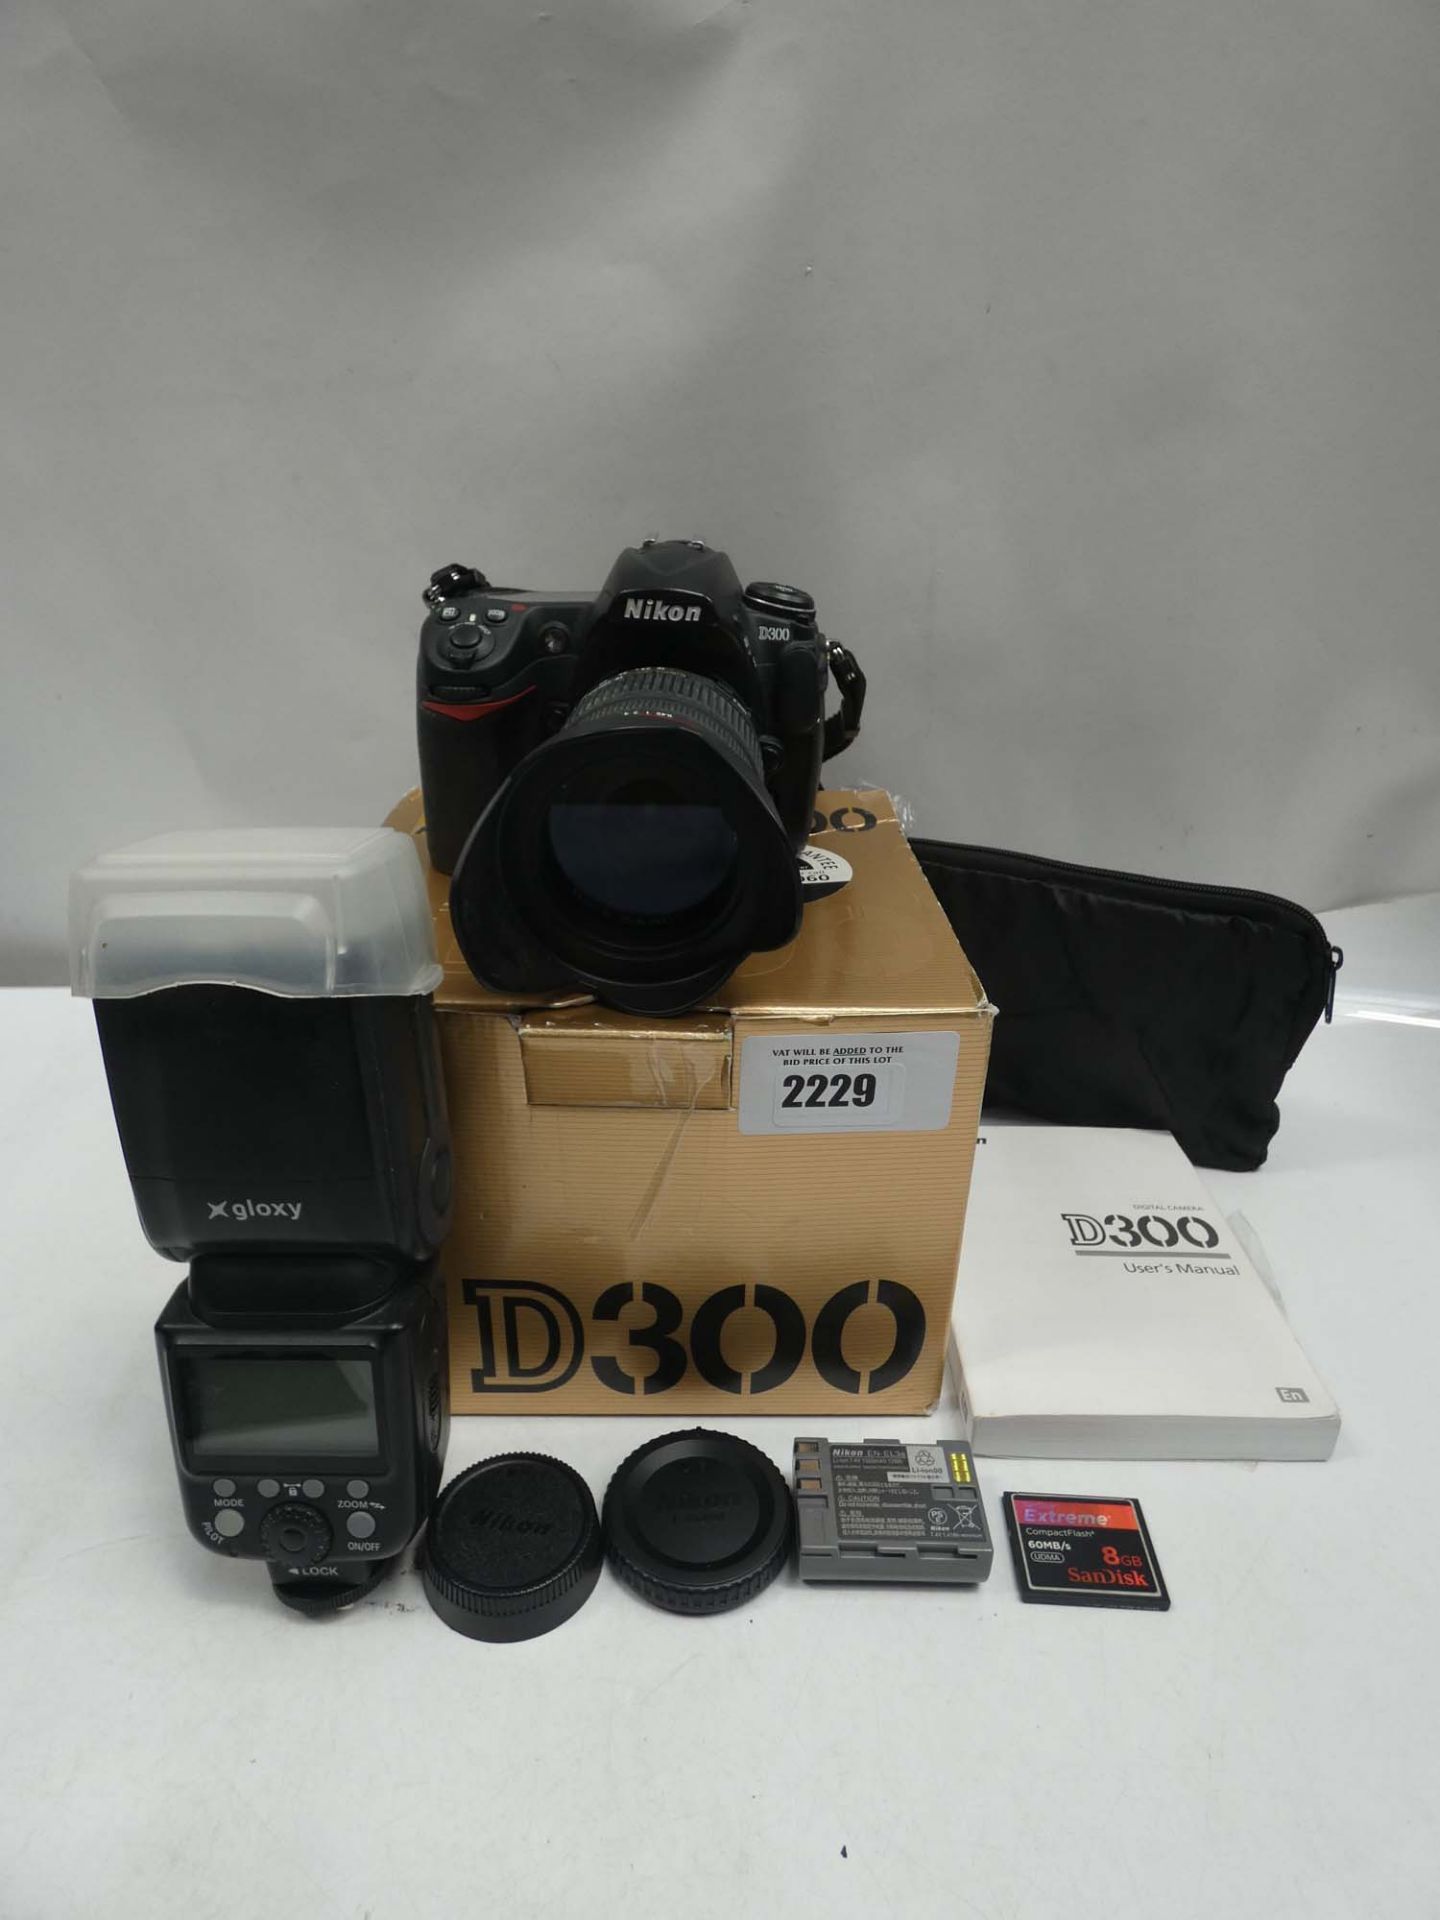 Nikon D300 SLR digital camera with box and accessories